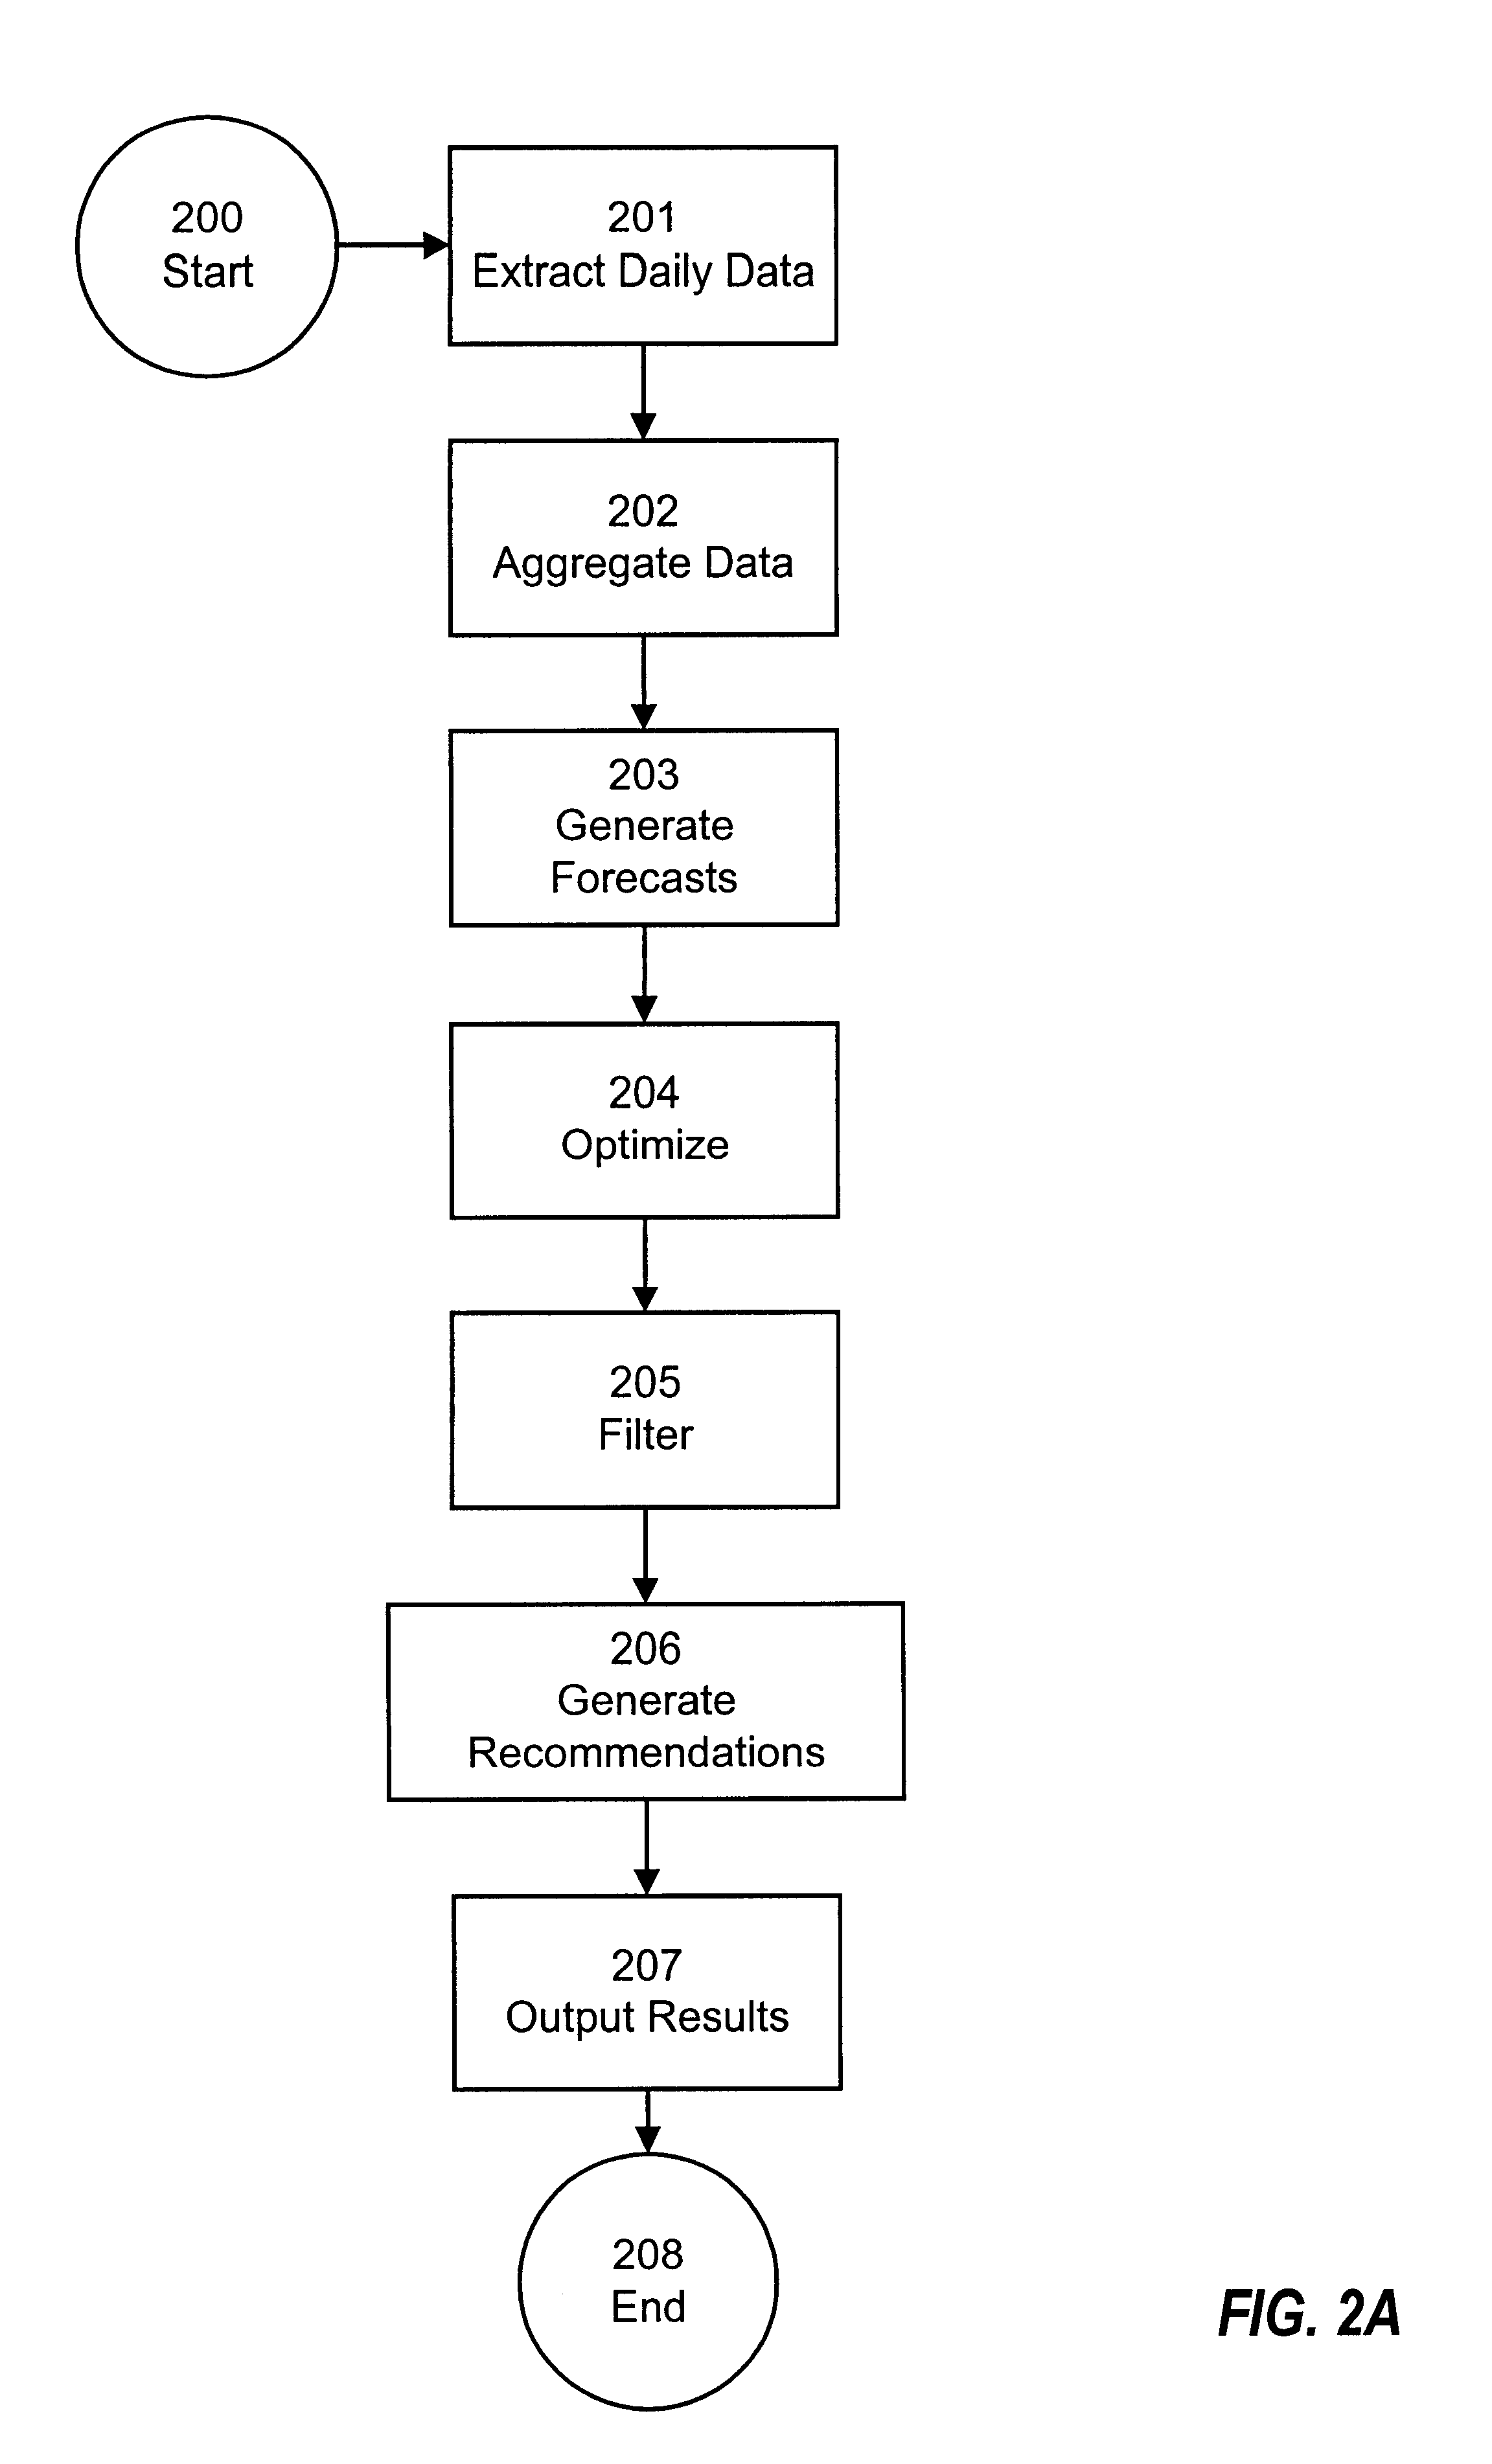 Resource price management incorporating indirect value